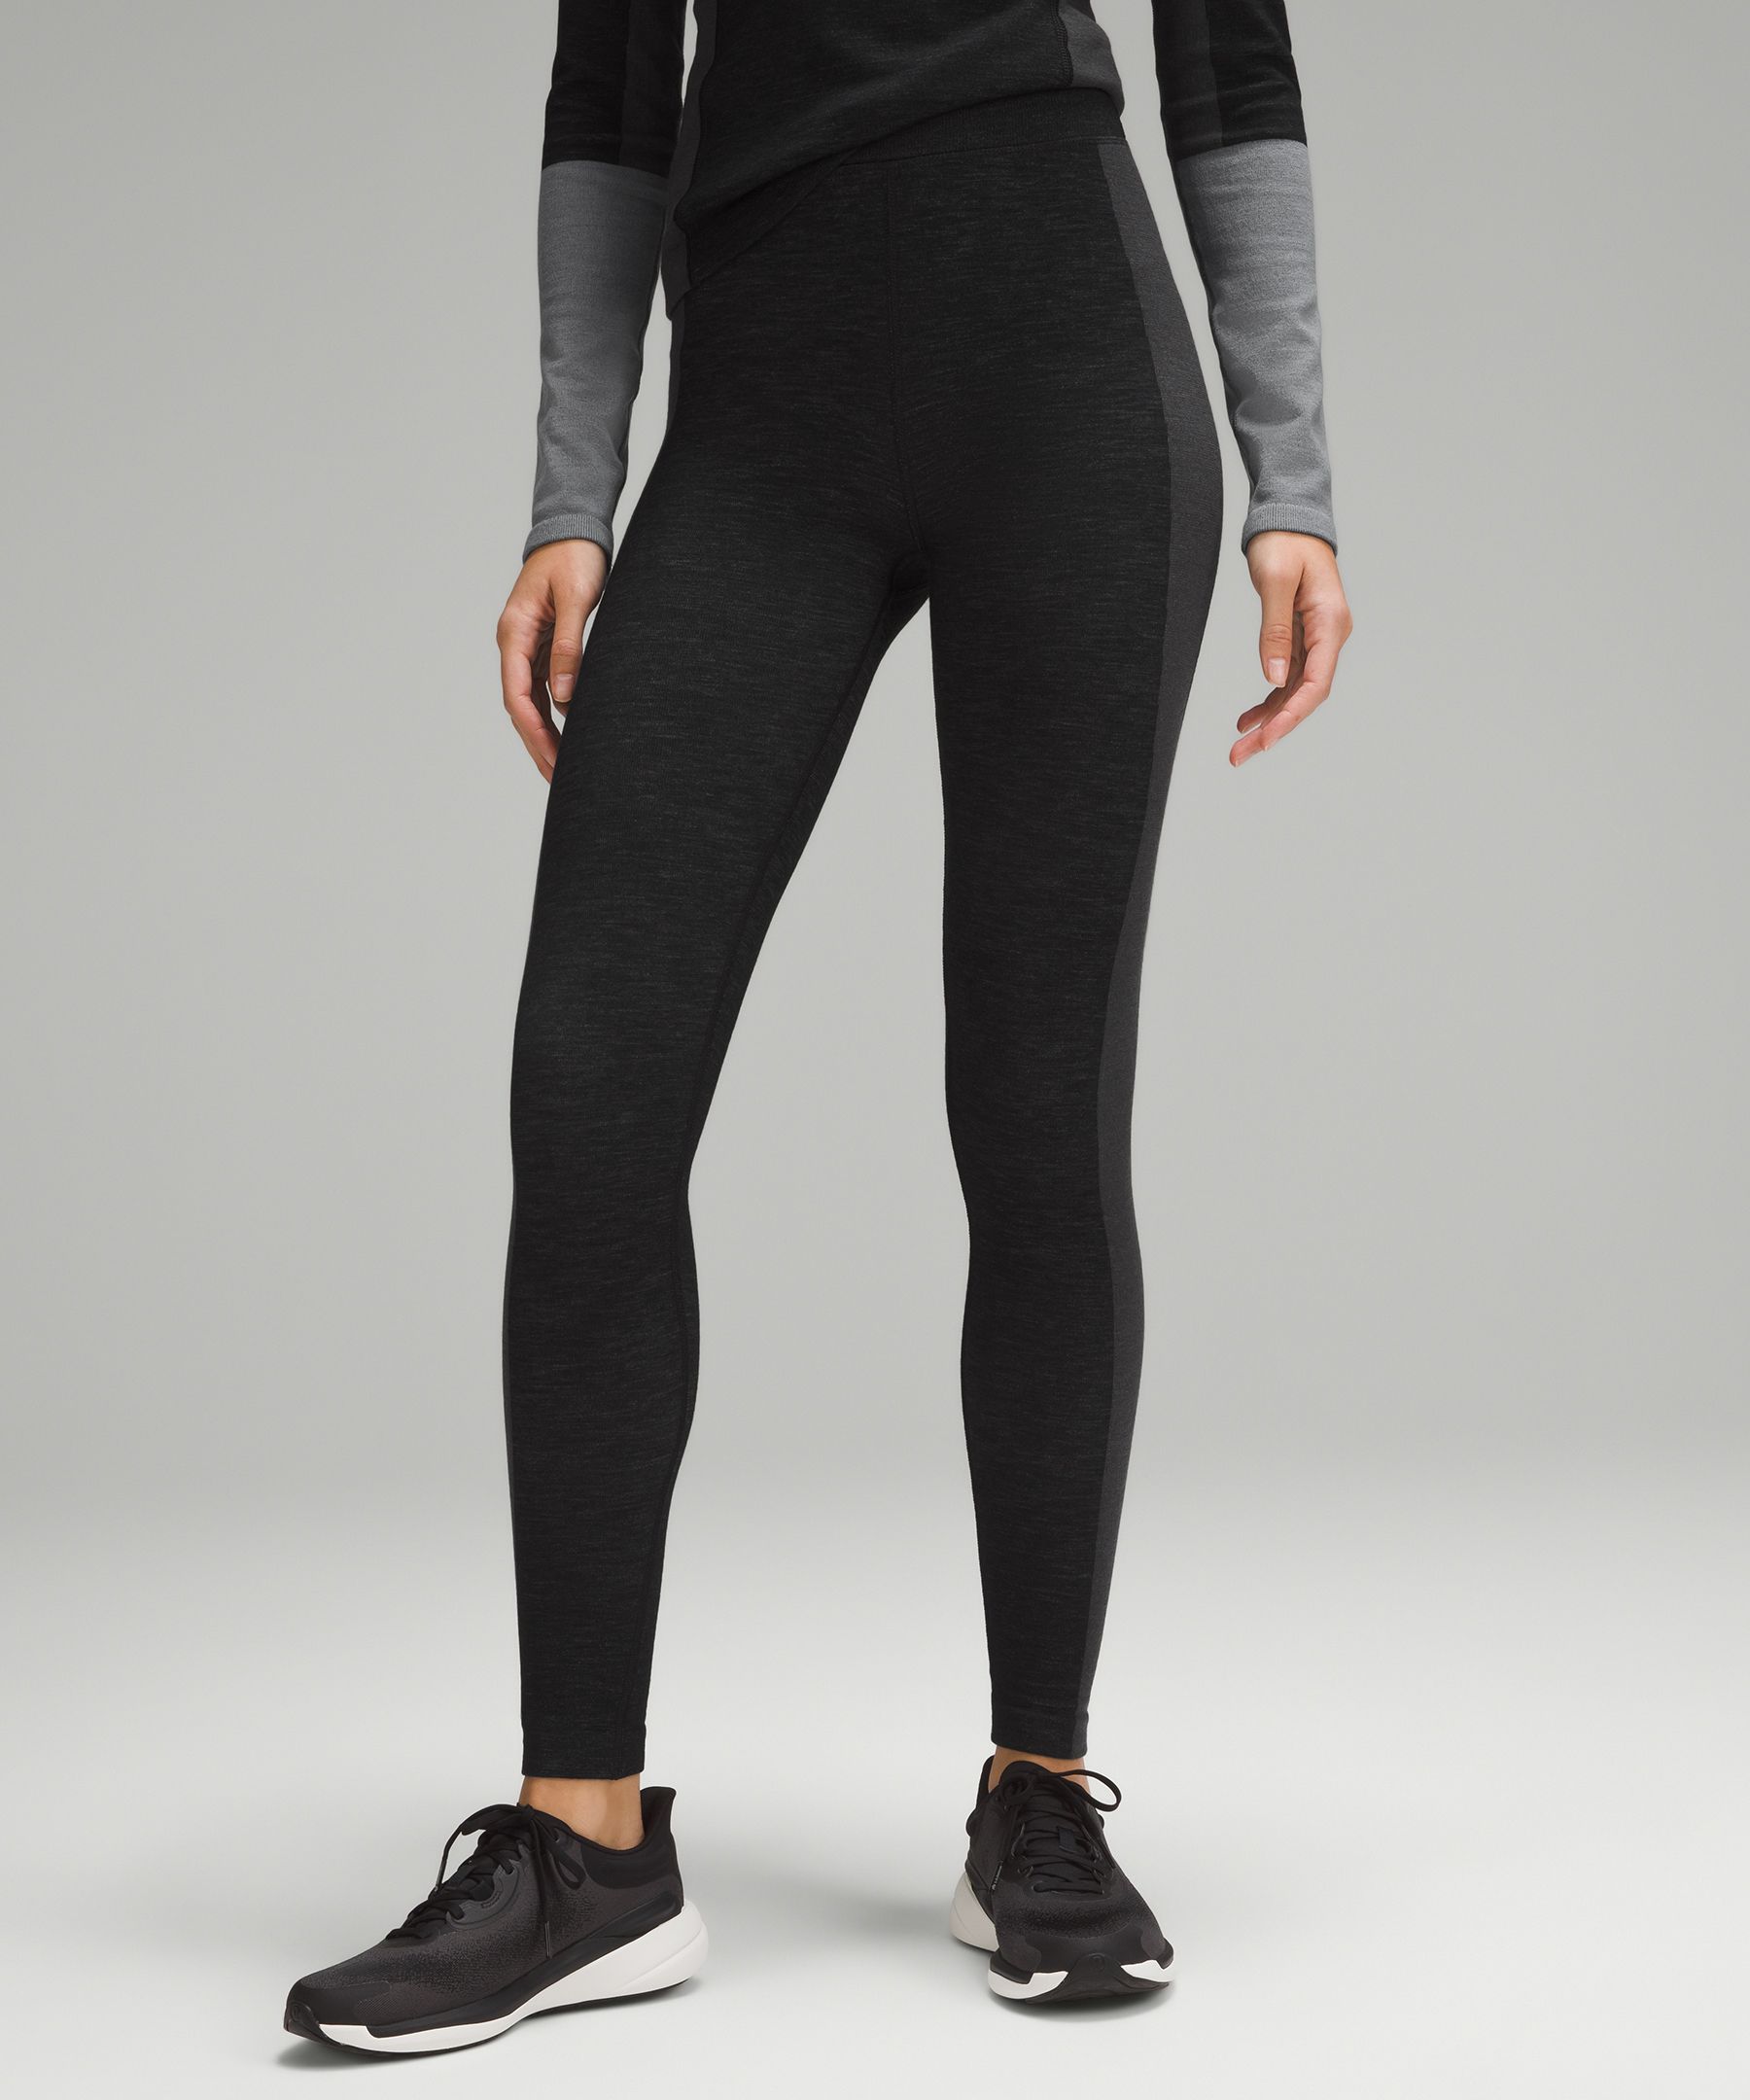 to the rescue - Now i need these in every color #lululemon #lul